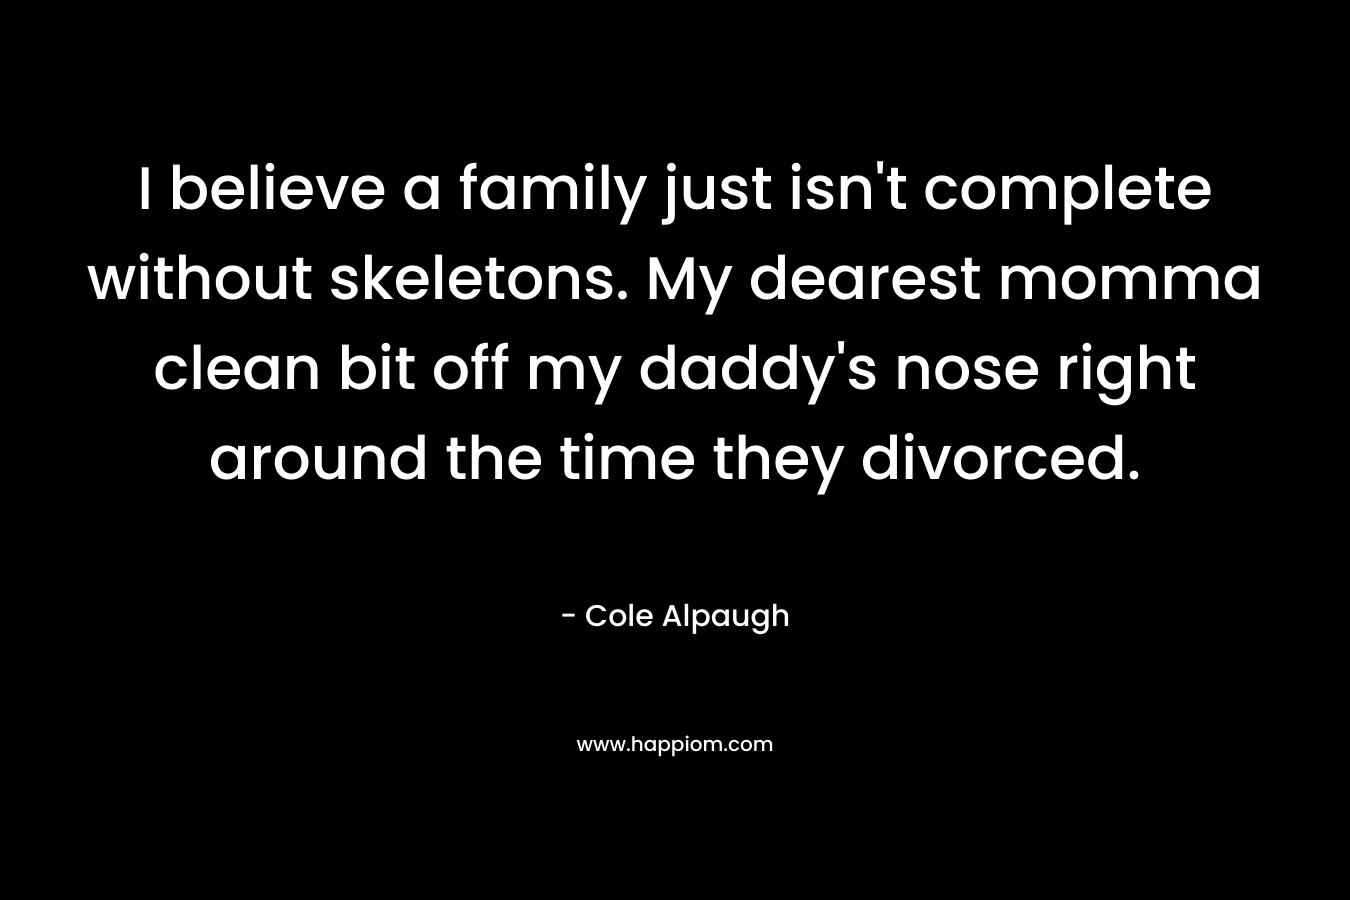 I believe a family just isn’t complete without skeletons. My dearest momma clean bit off my daddy’s nose right around the time they divorced. – Cole Alpaugh